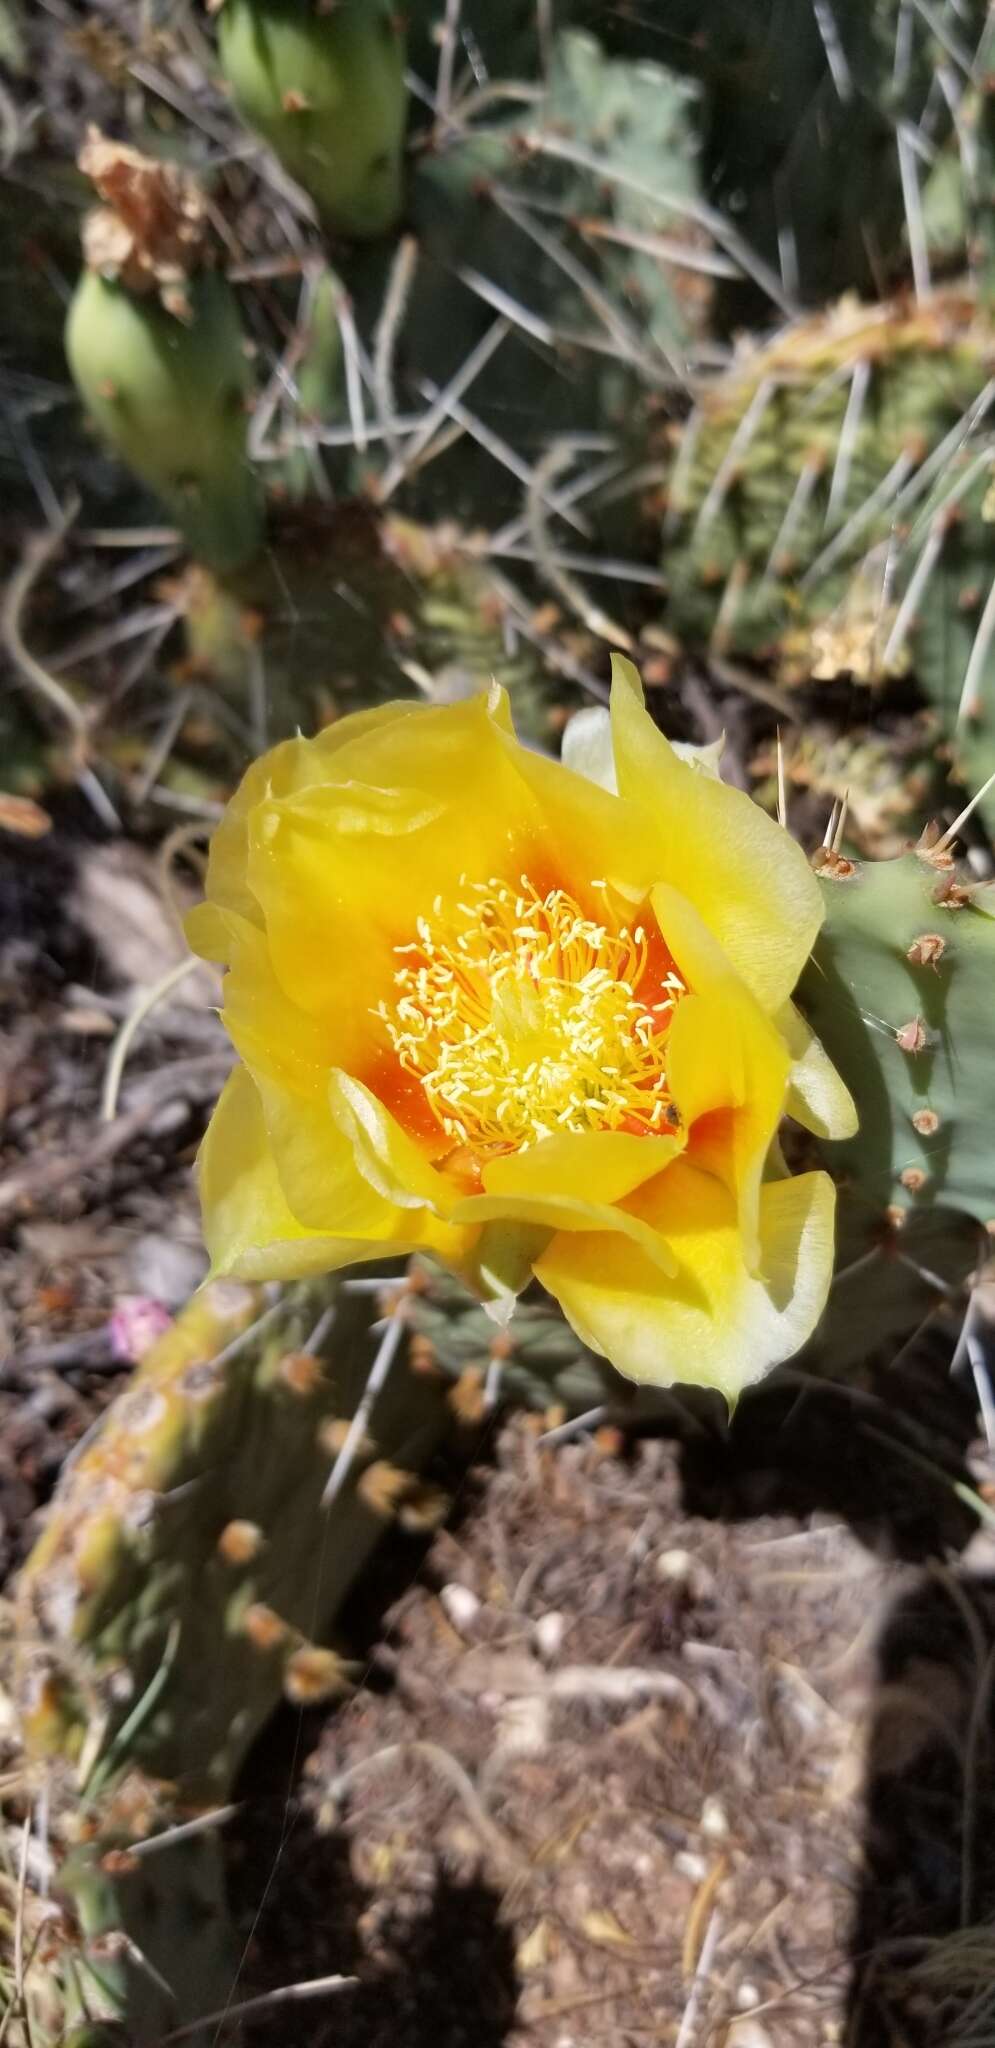 Image of twistspine pricklypear